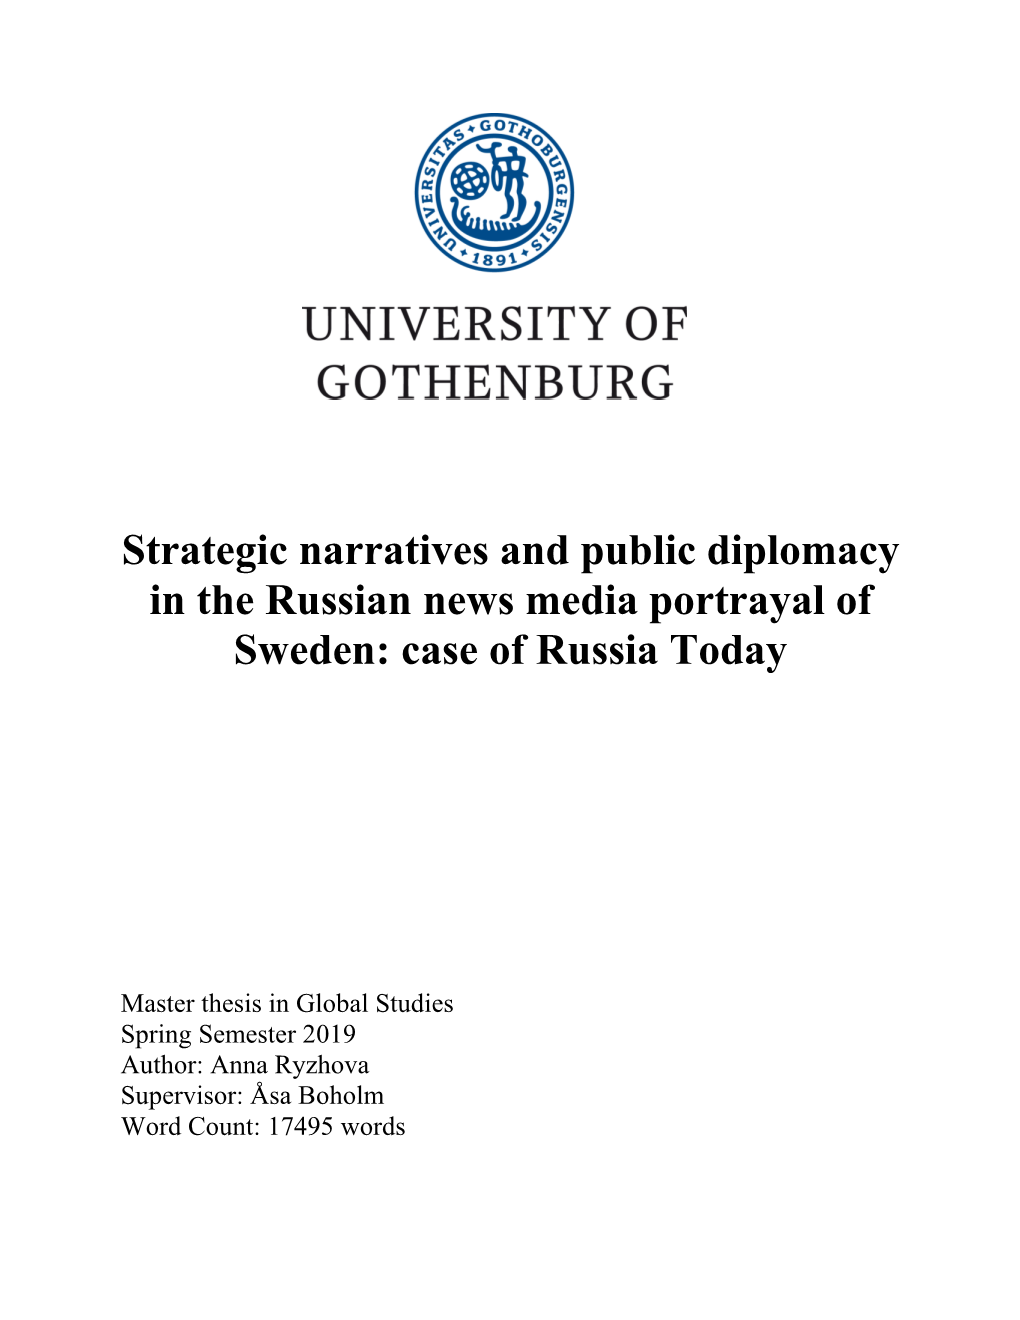 Strategic Narratives and Public Diplomacy in the Russian News Media Portrayal of Sweden: Case of Russia Today